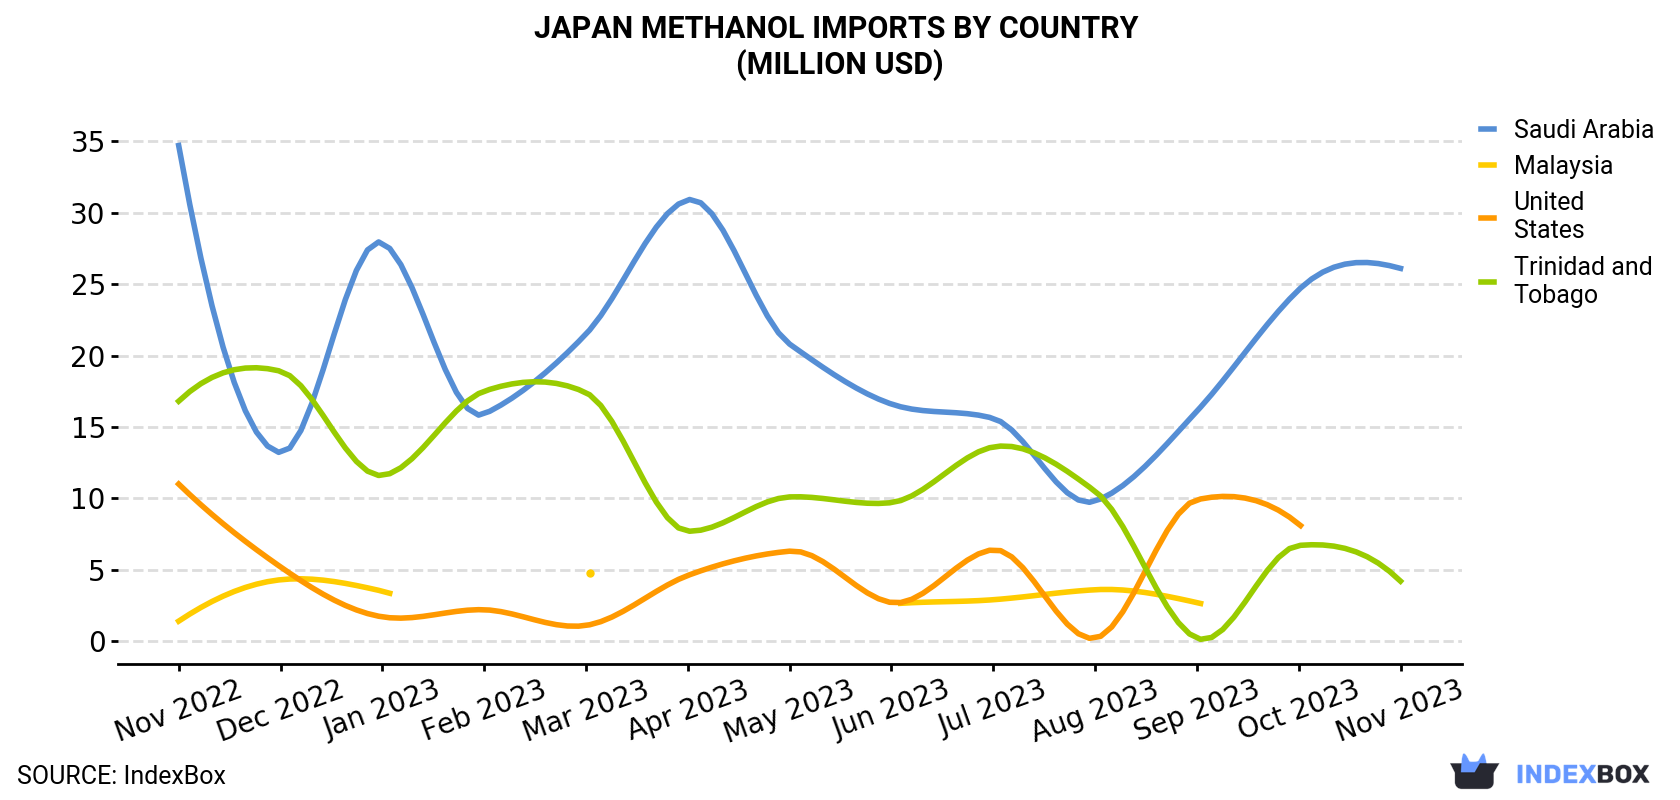 Japan Methanol Imports By Country (Million USD)